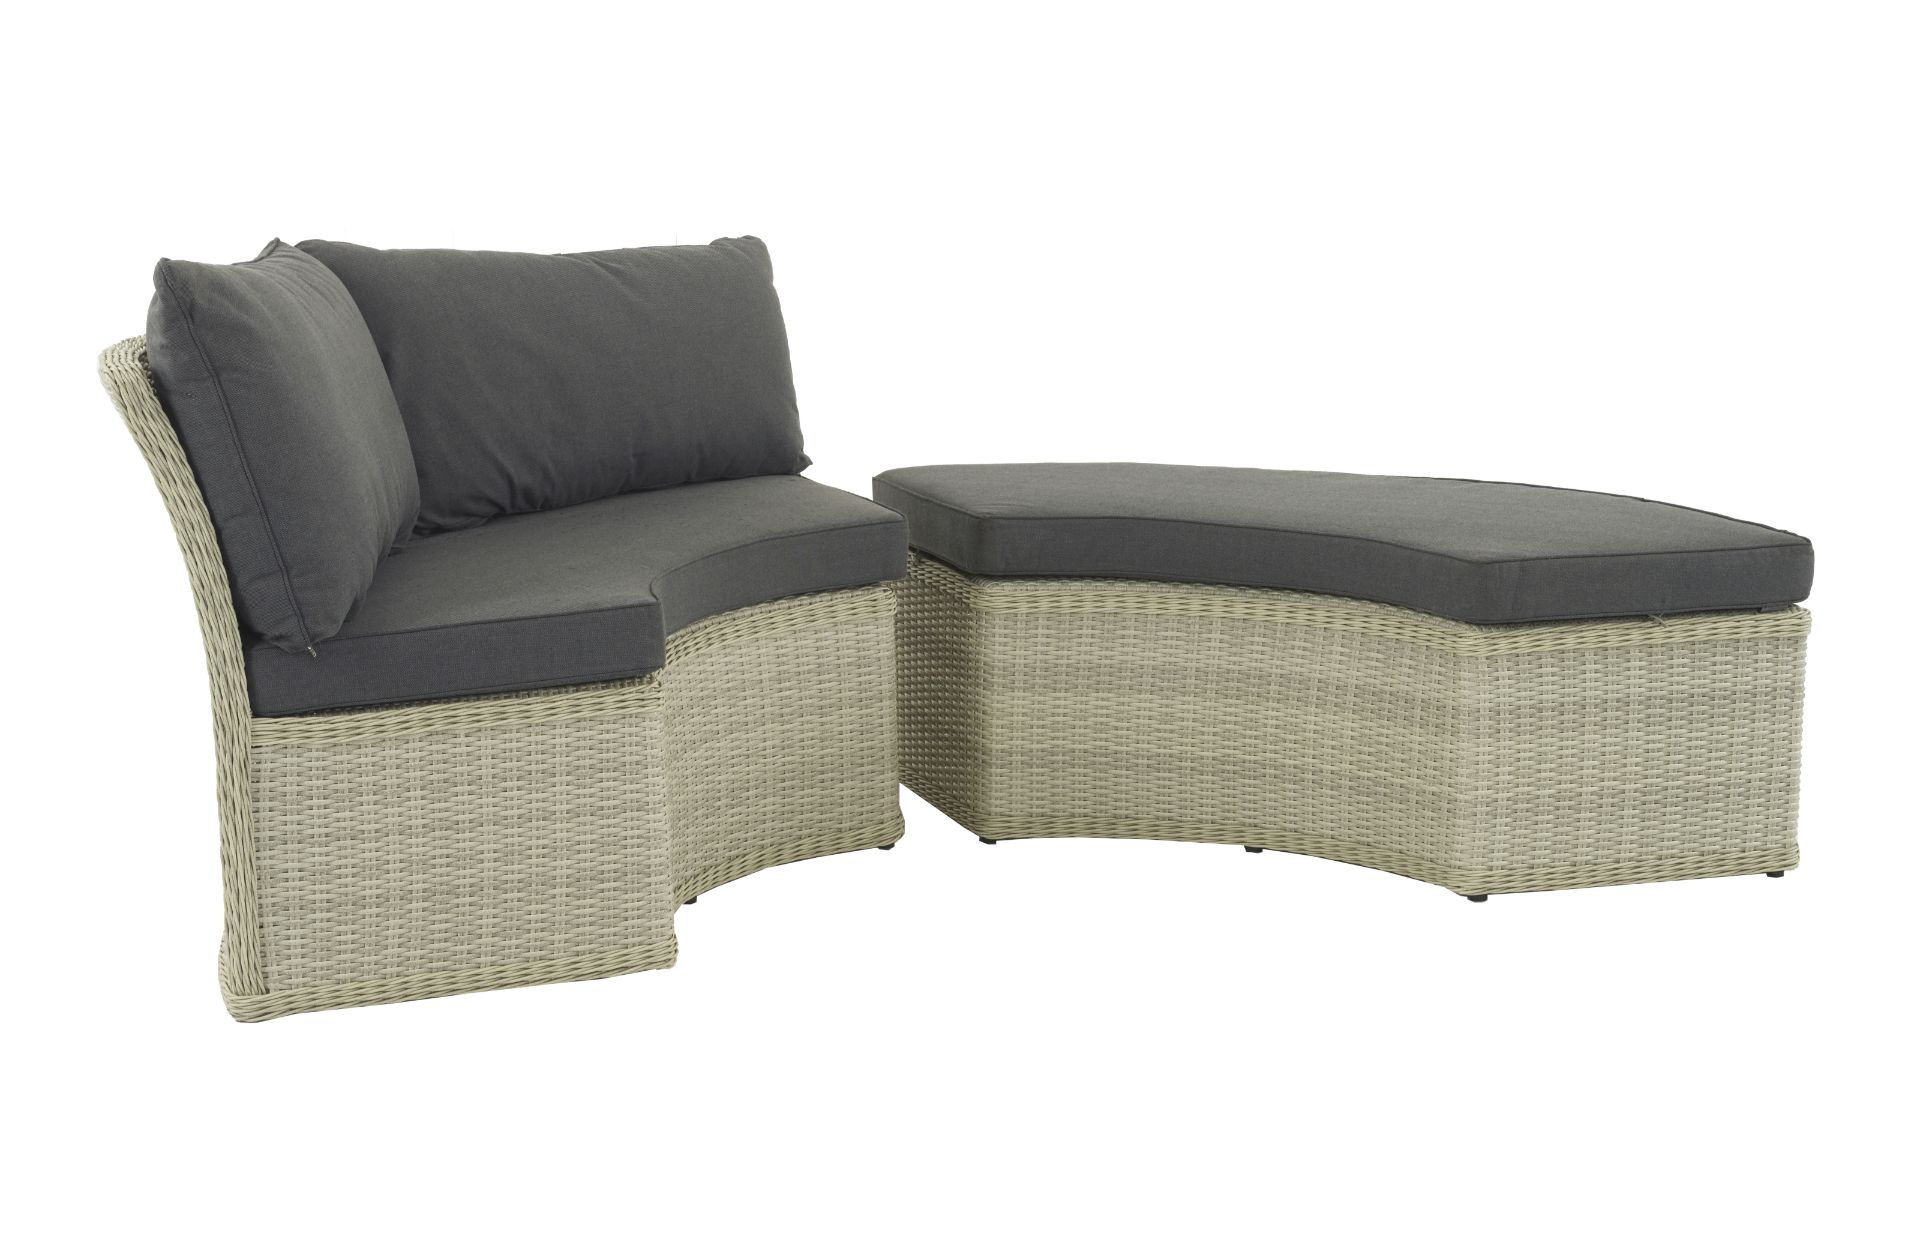 Set A505 Monterey Curved Sofa & Bench - Right (Dove Grey)